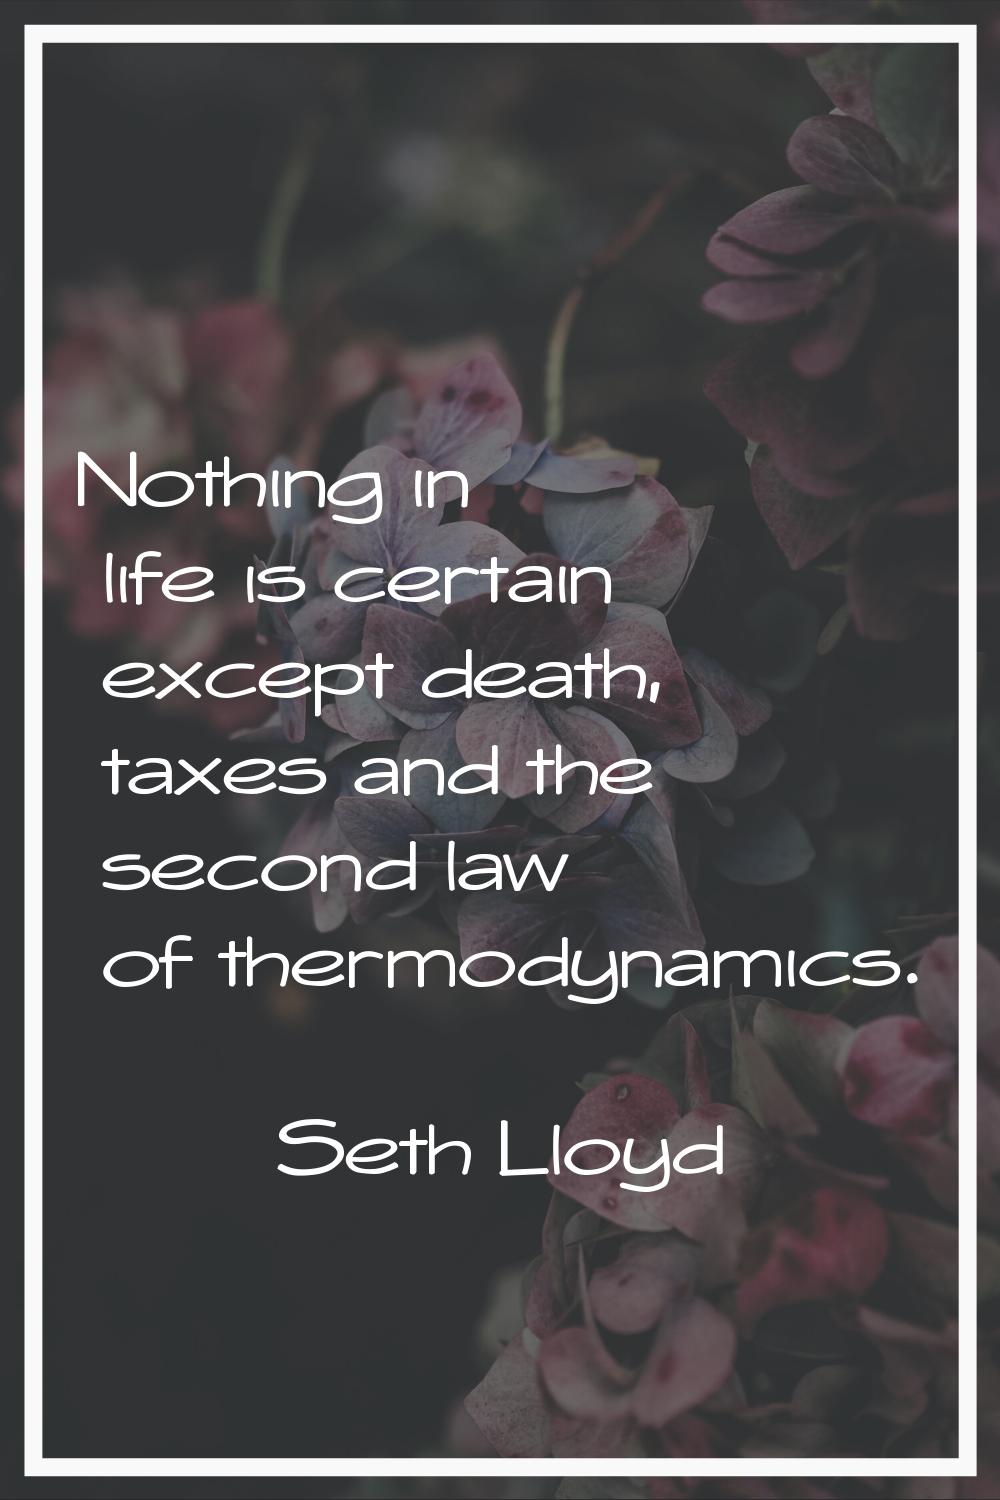 Nothing in life is certain except death, taxes and the second law of thermodynamics.